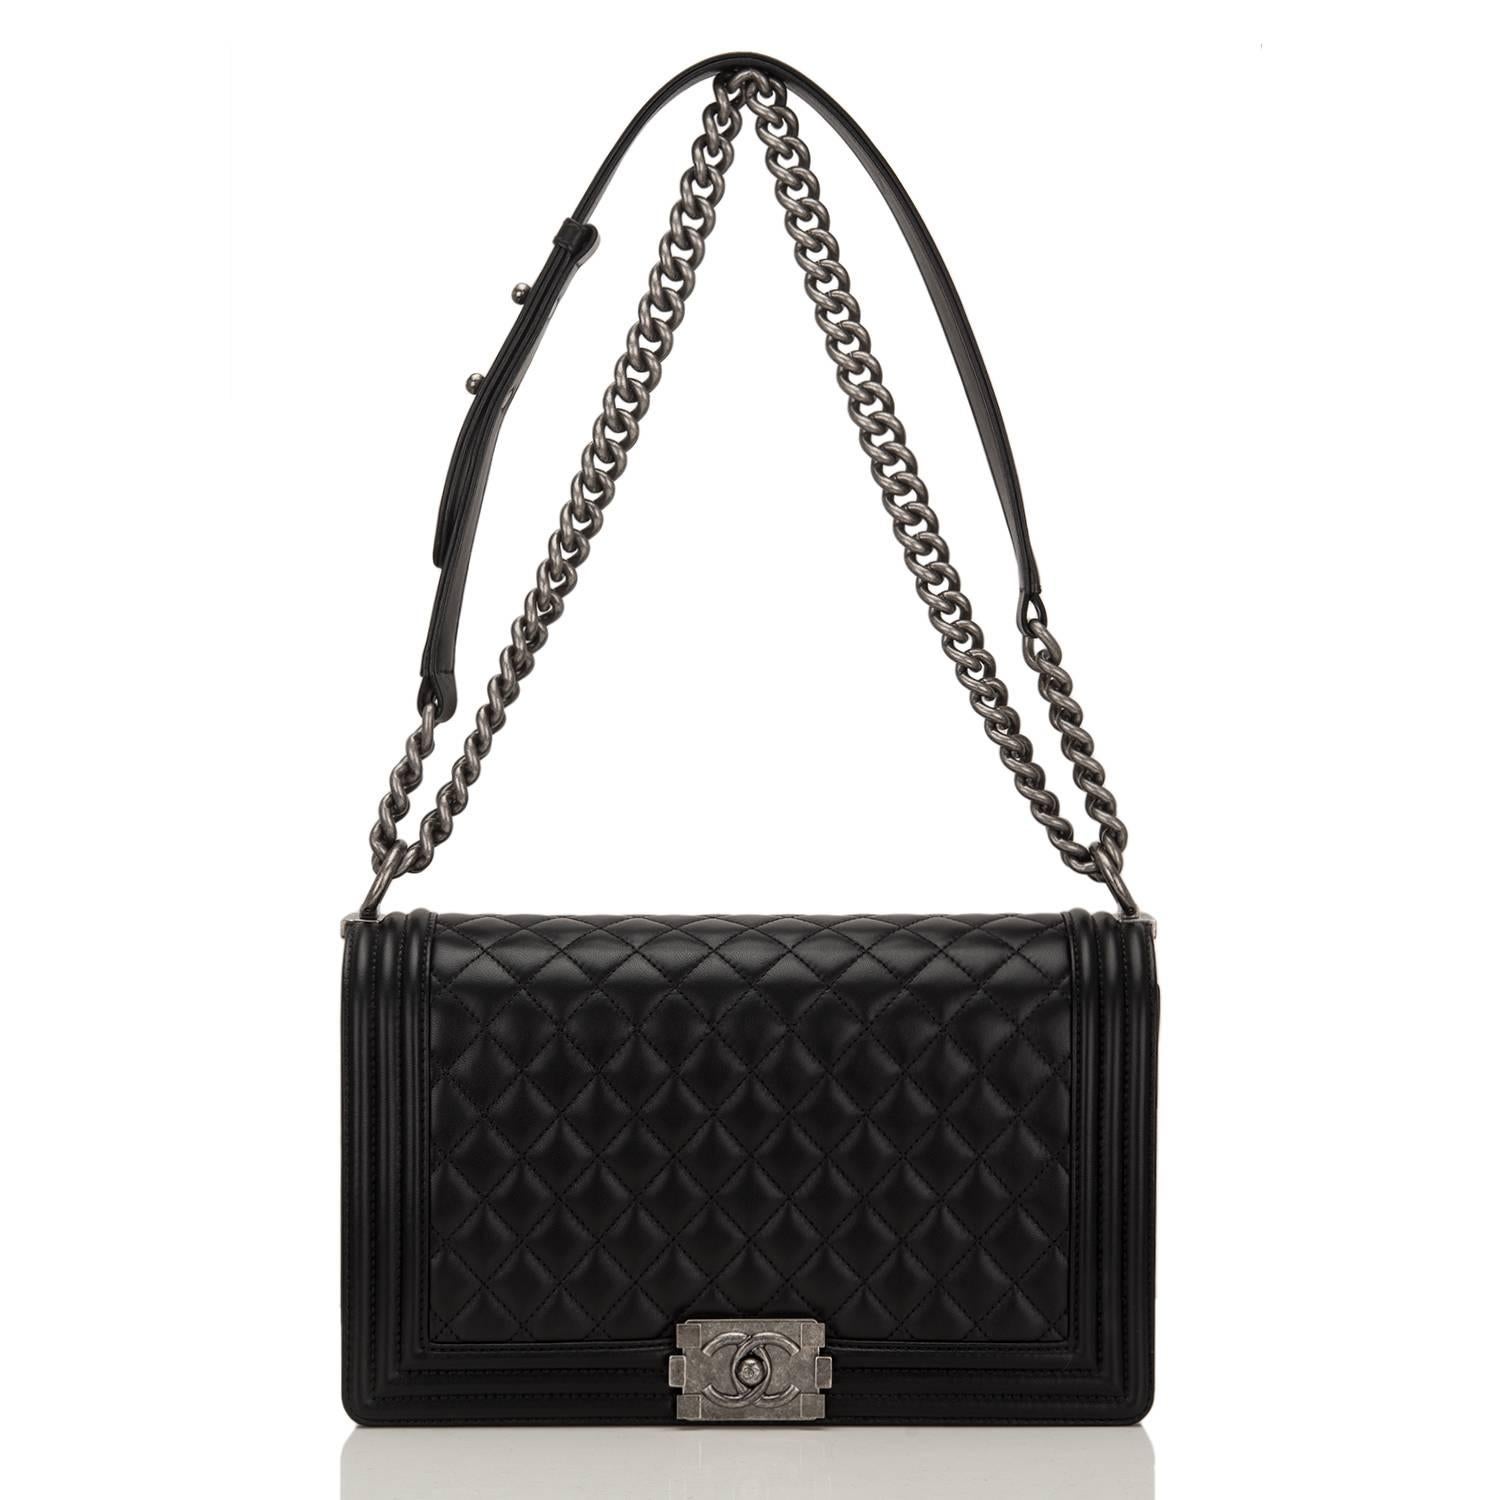 Chanel Black Quilted Lambskin New Medium Boy Bag For Sale 2